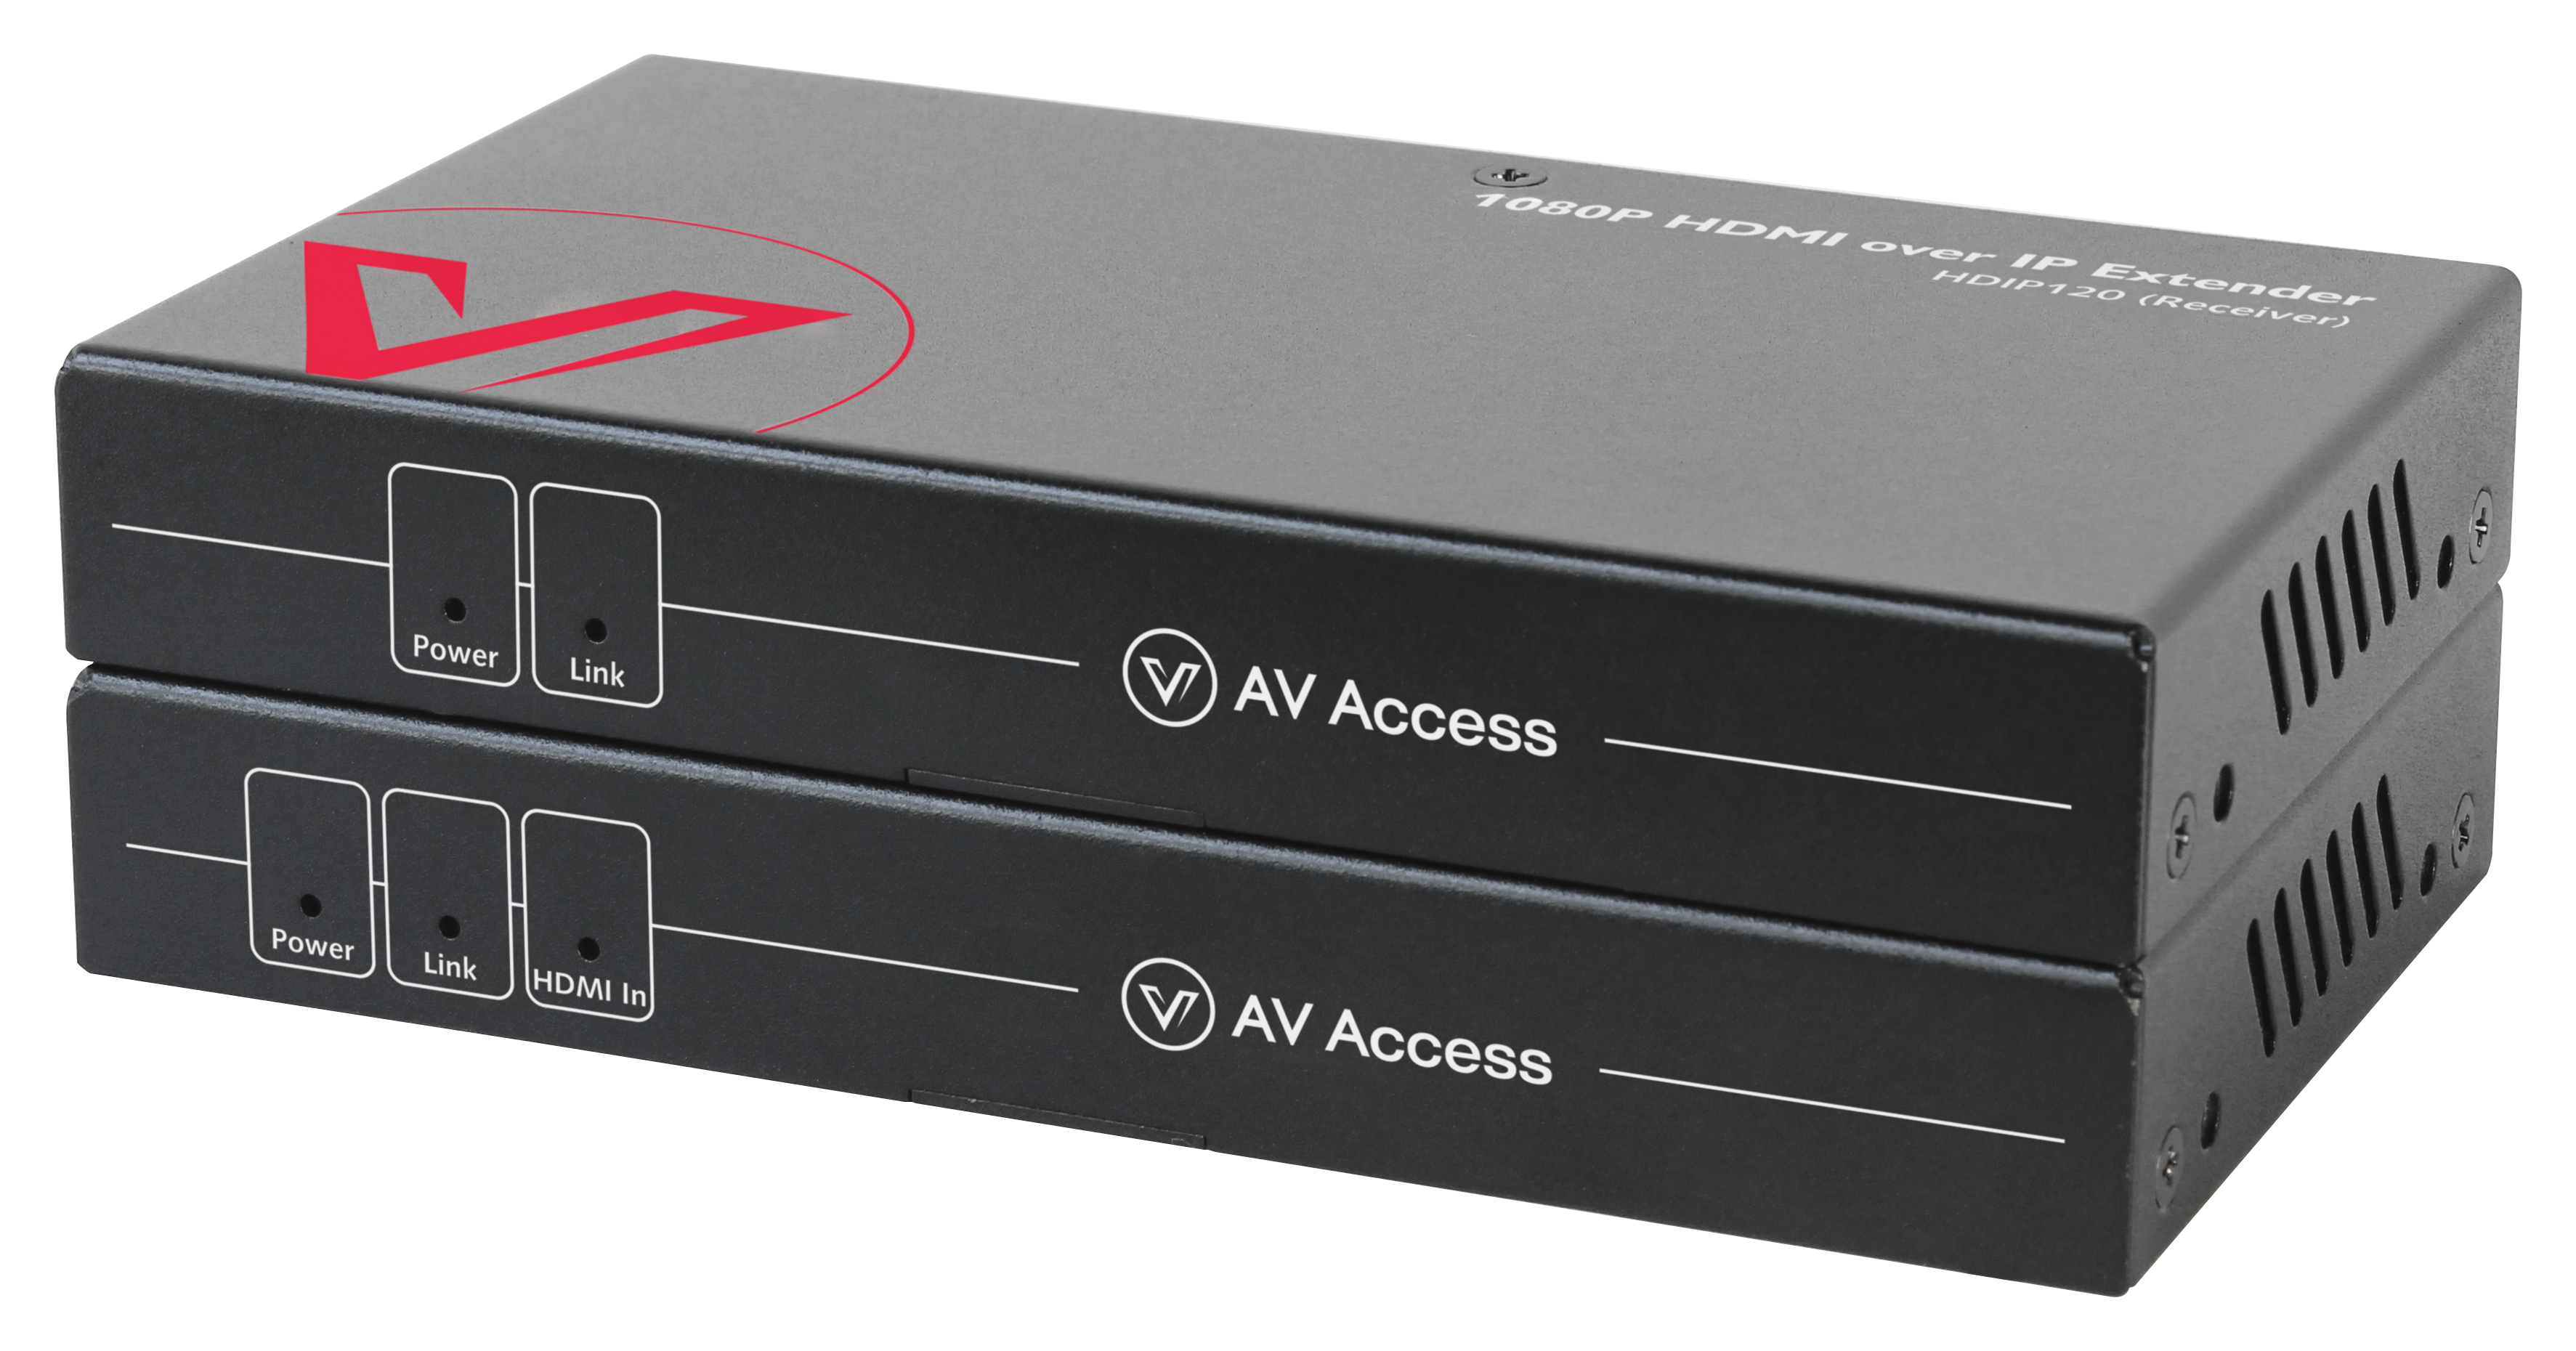 AV Access Introduces Its New HDMI over IP Kit to Help Build an Extender Splitter Combo in Home and Business Applications